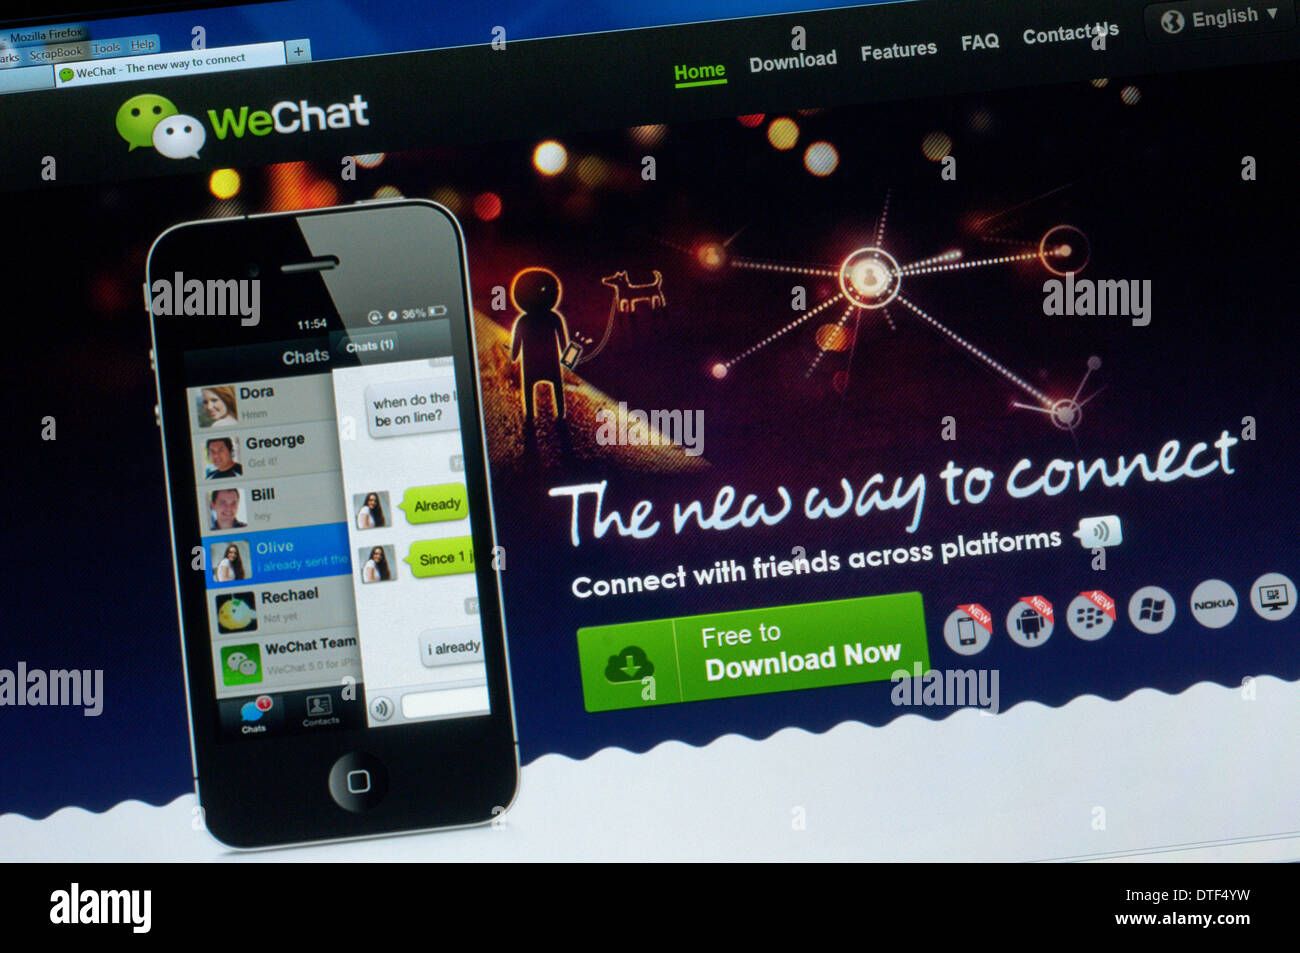 The home page of the WeChat web site - a mobile text and voice messaging service. Stock Photo